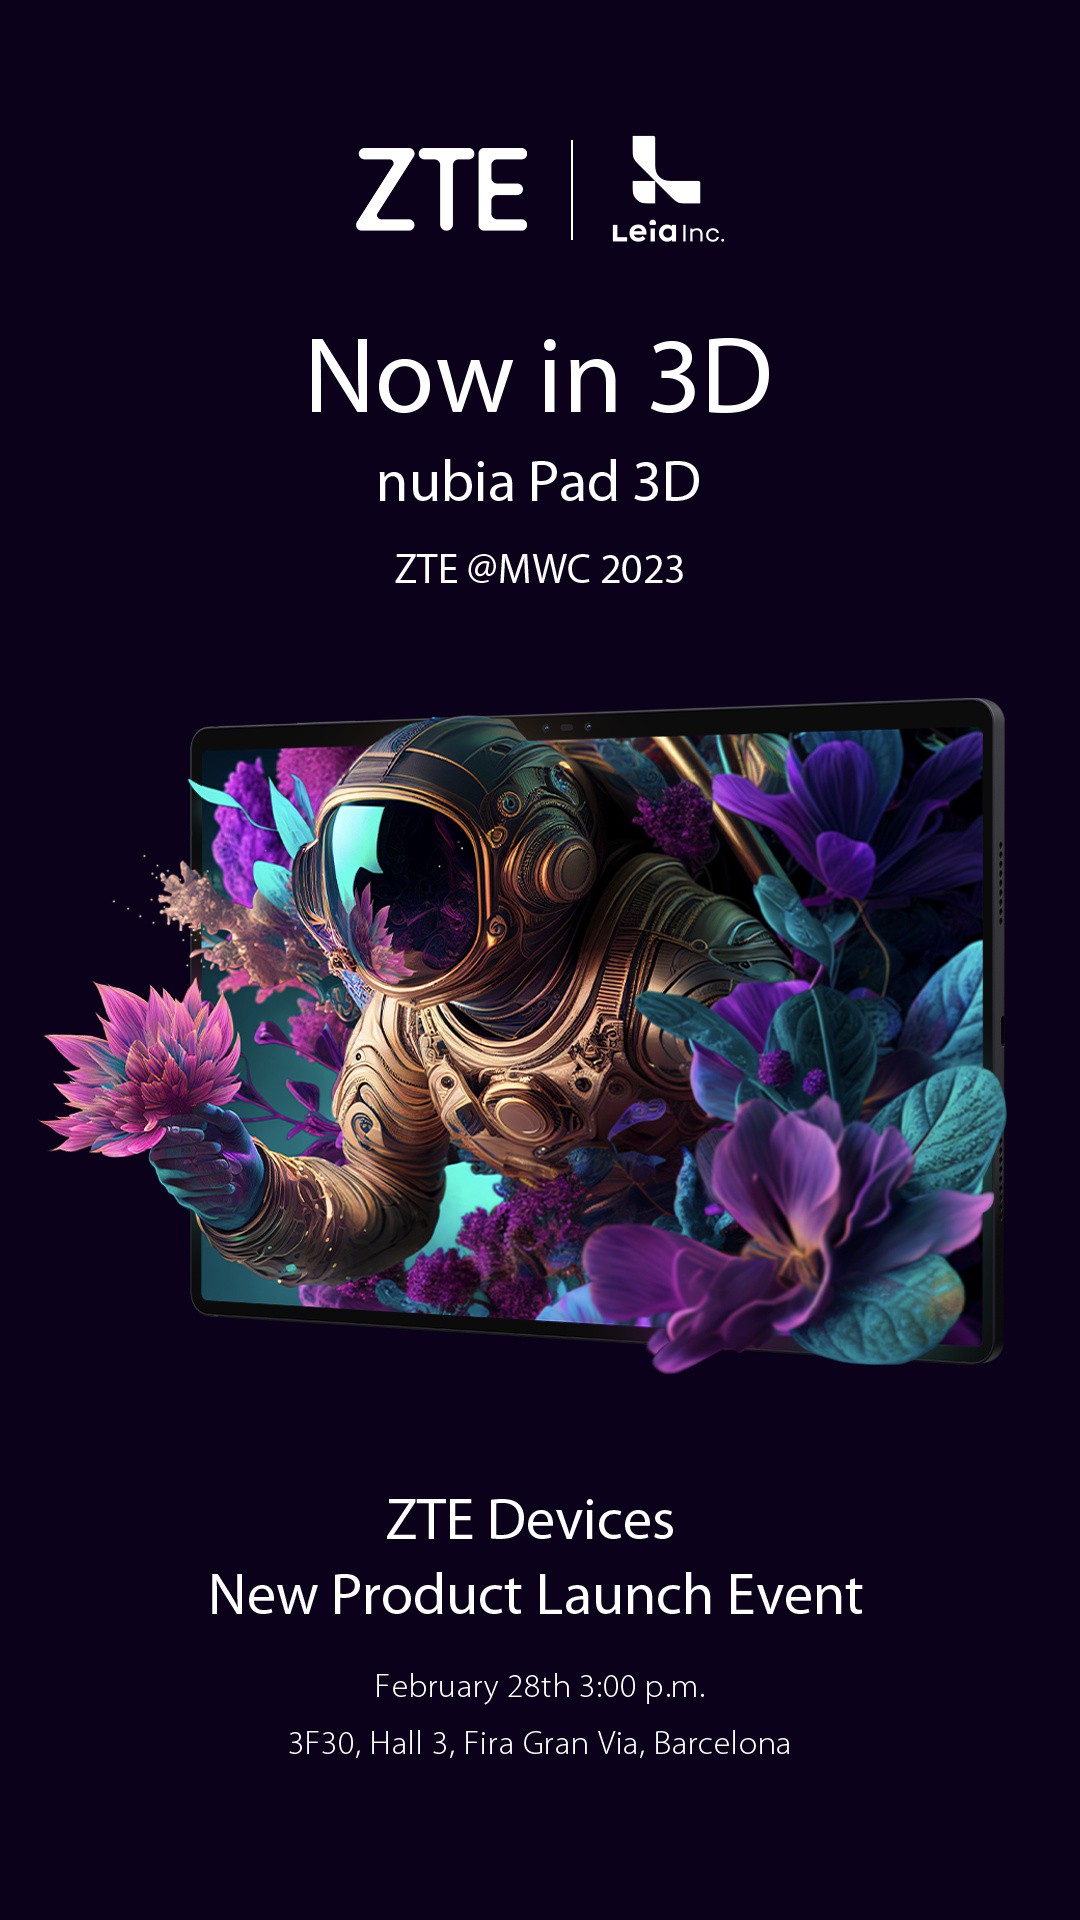 MWC 2023: ZTE will release the Nubia Pad 3D on February 28 | DroidAfrica